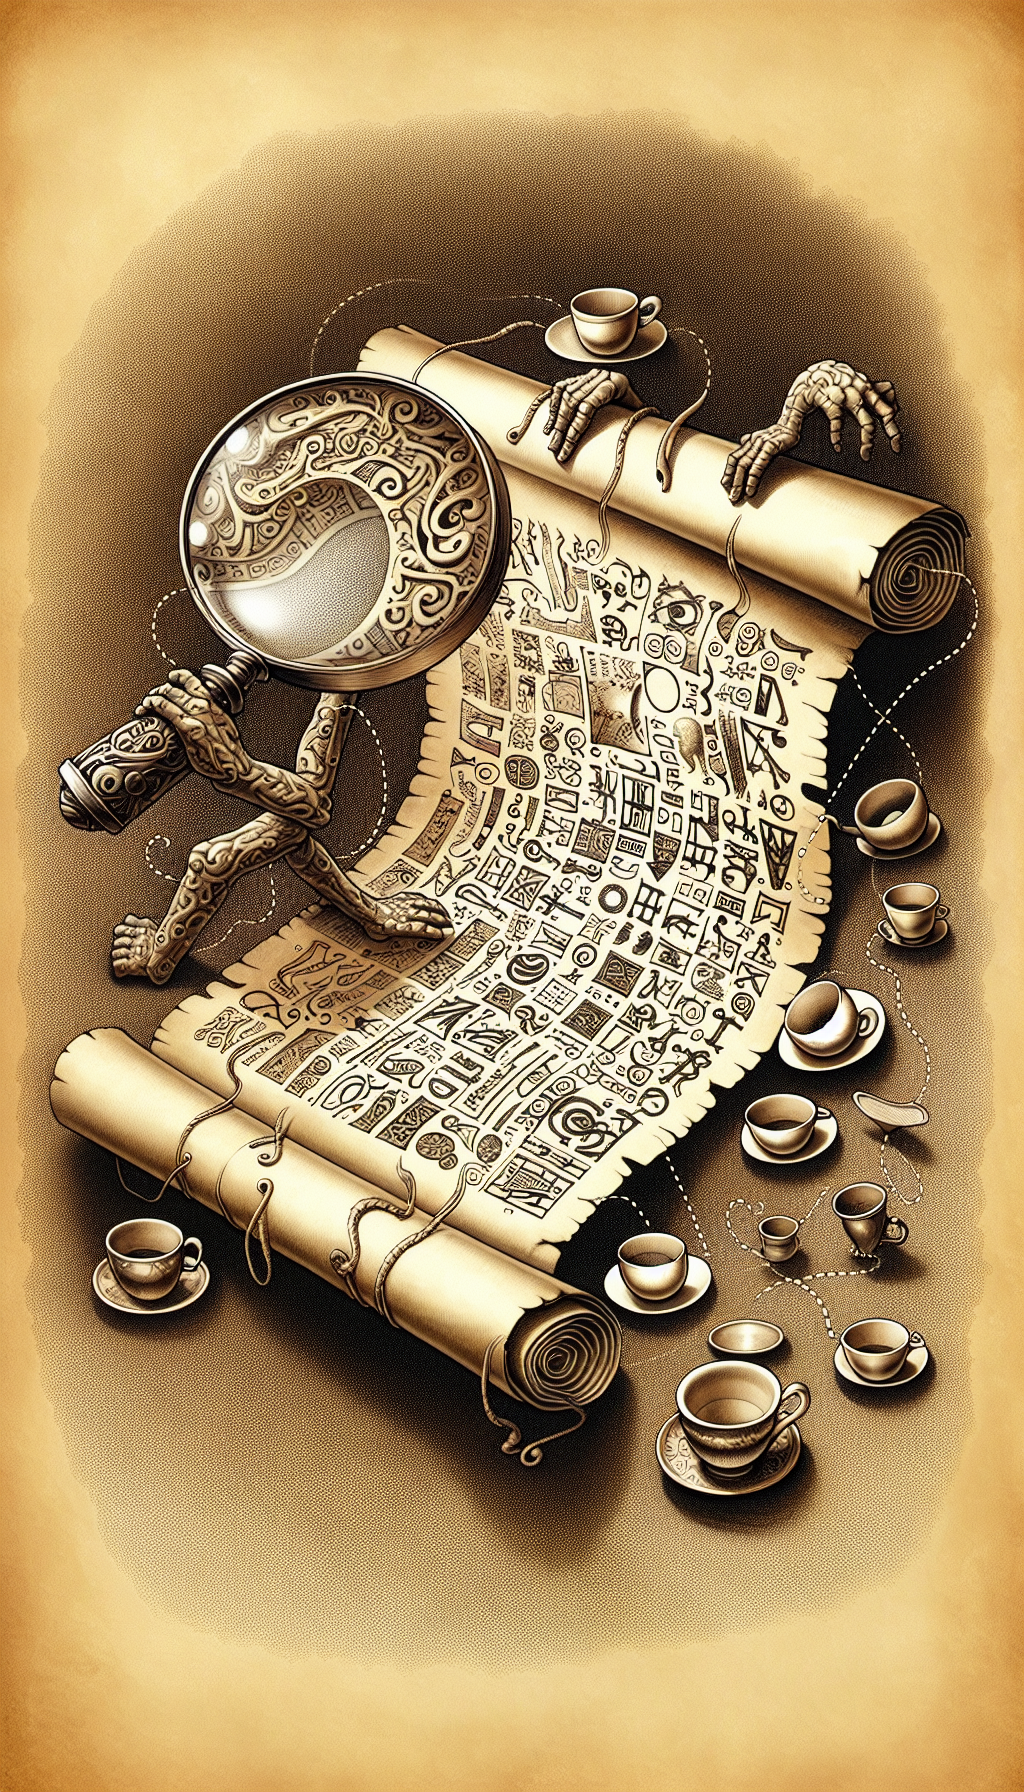 An inquisitive anthropomorphic magnifying glass peers closely at a whimsical parchment unfurling like a scroll beneath an array of antique teacups hovering above. The parchment reveals intricate maker's marks, styled as a cryptic map with dotted lines and symbols leading to each cup. The illustration merges with styles ranging from realistic to abstract, echoing the diversity and history encoded in the markings.